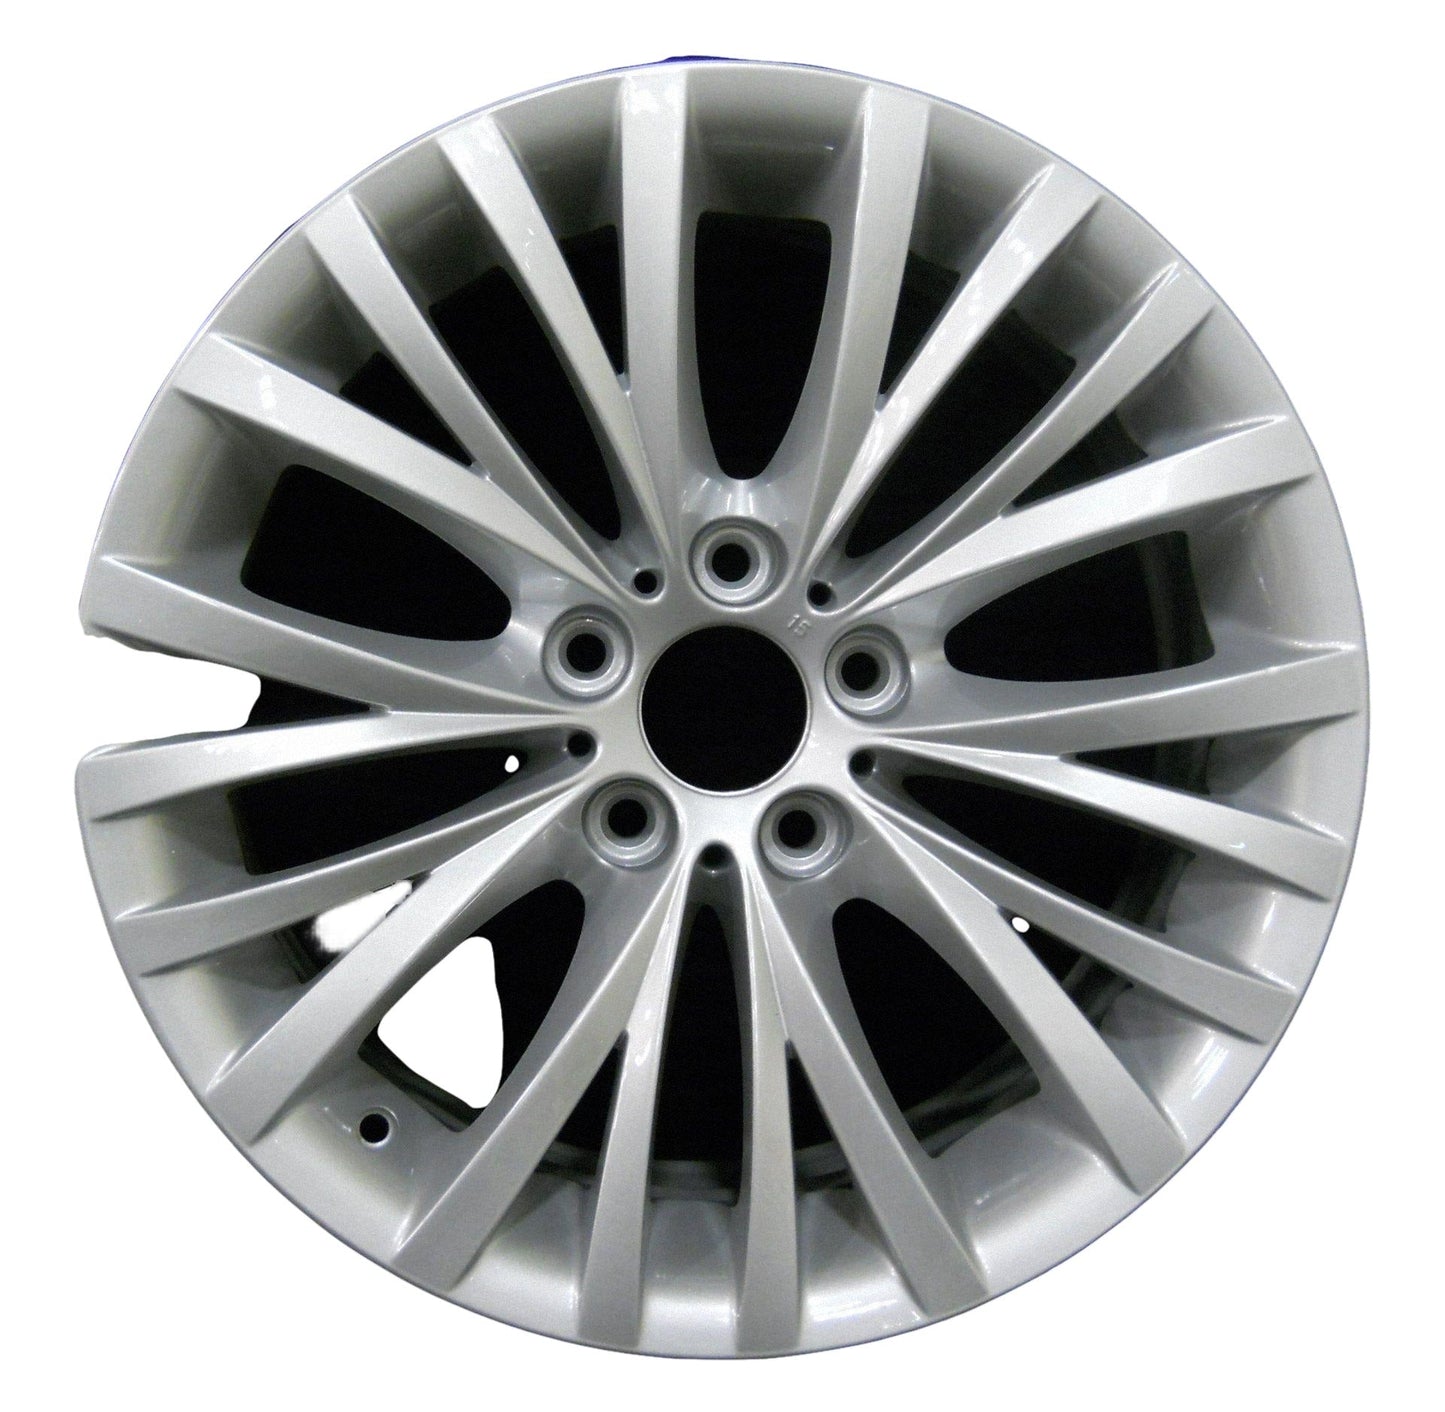 BMW Z4  2009, 2010, 2011, 2012, 2013, 2014, 2015, 2016 Factory OEM Car Wheel Size 18x8 Alloy WAO.71357FT.PS15.FF